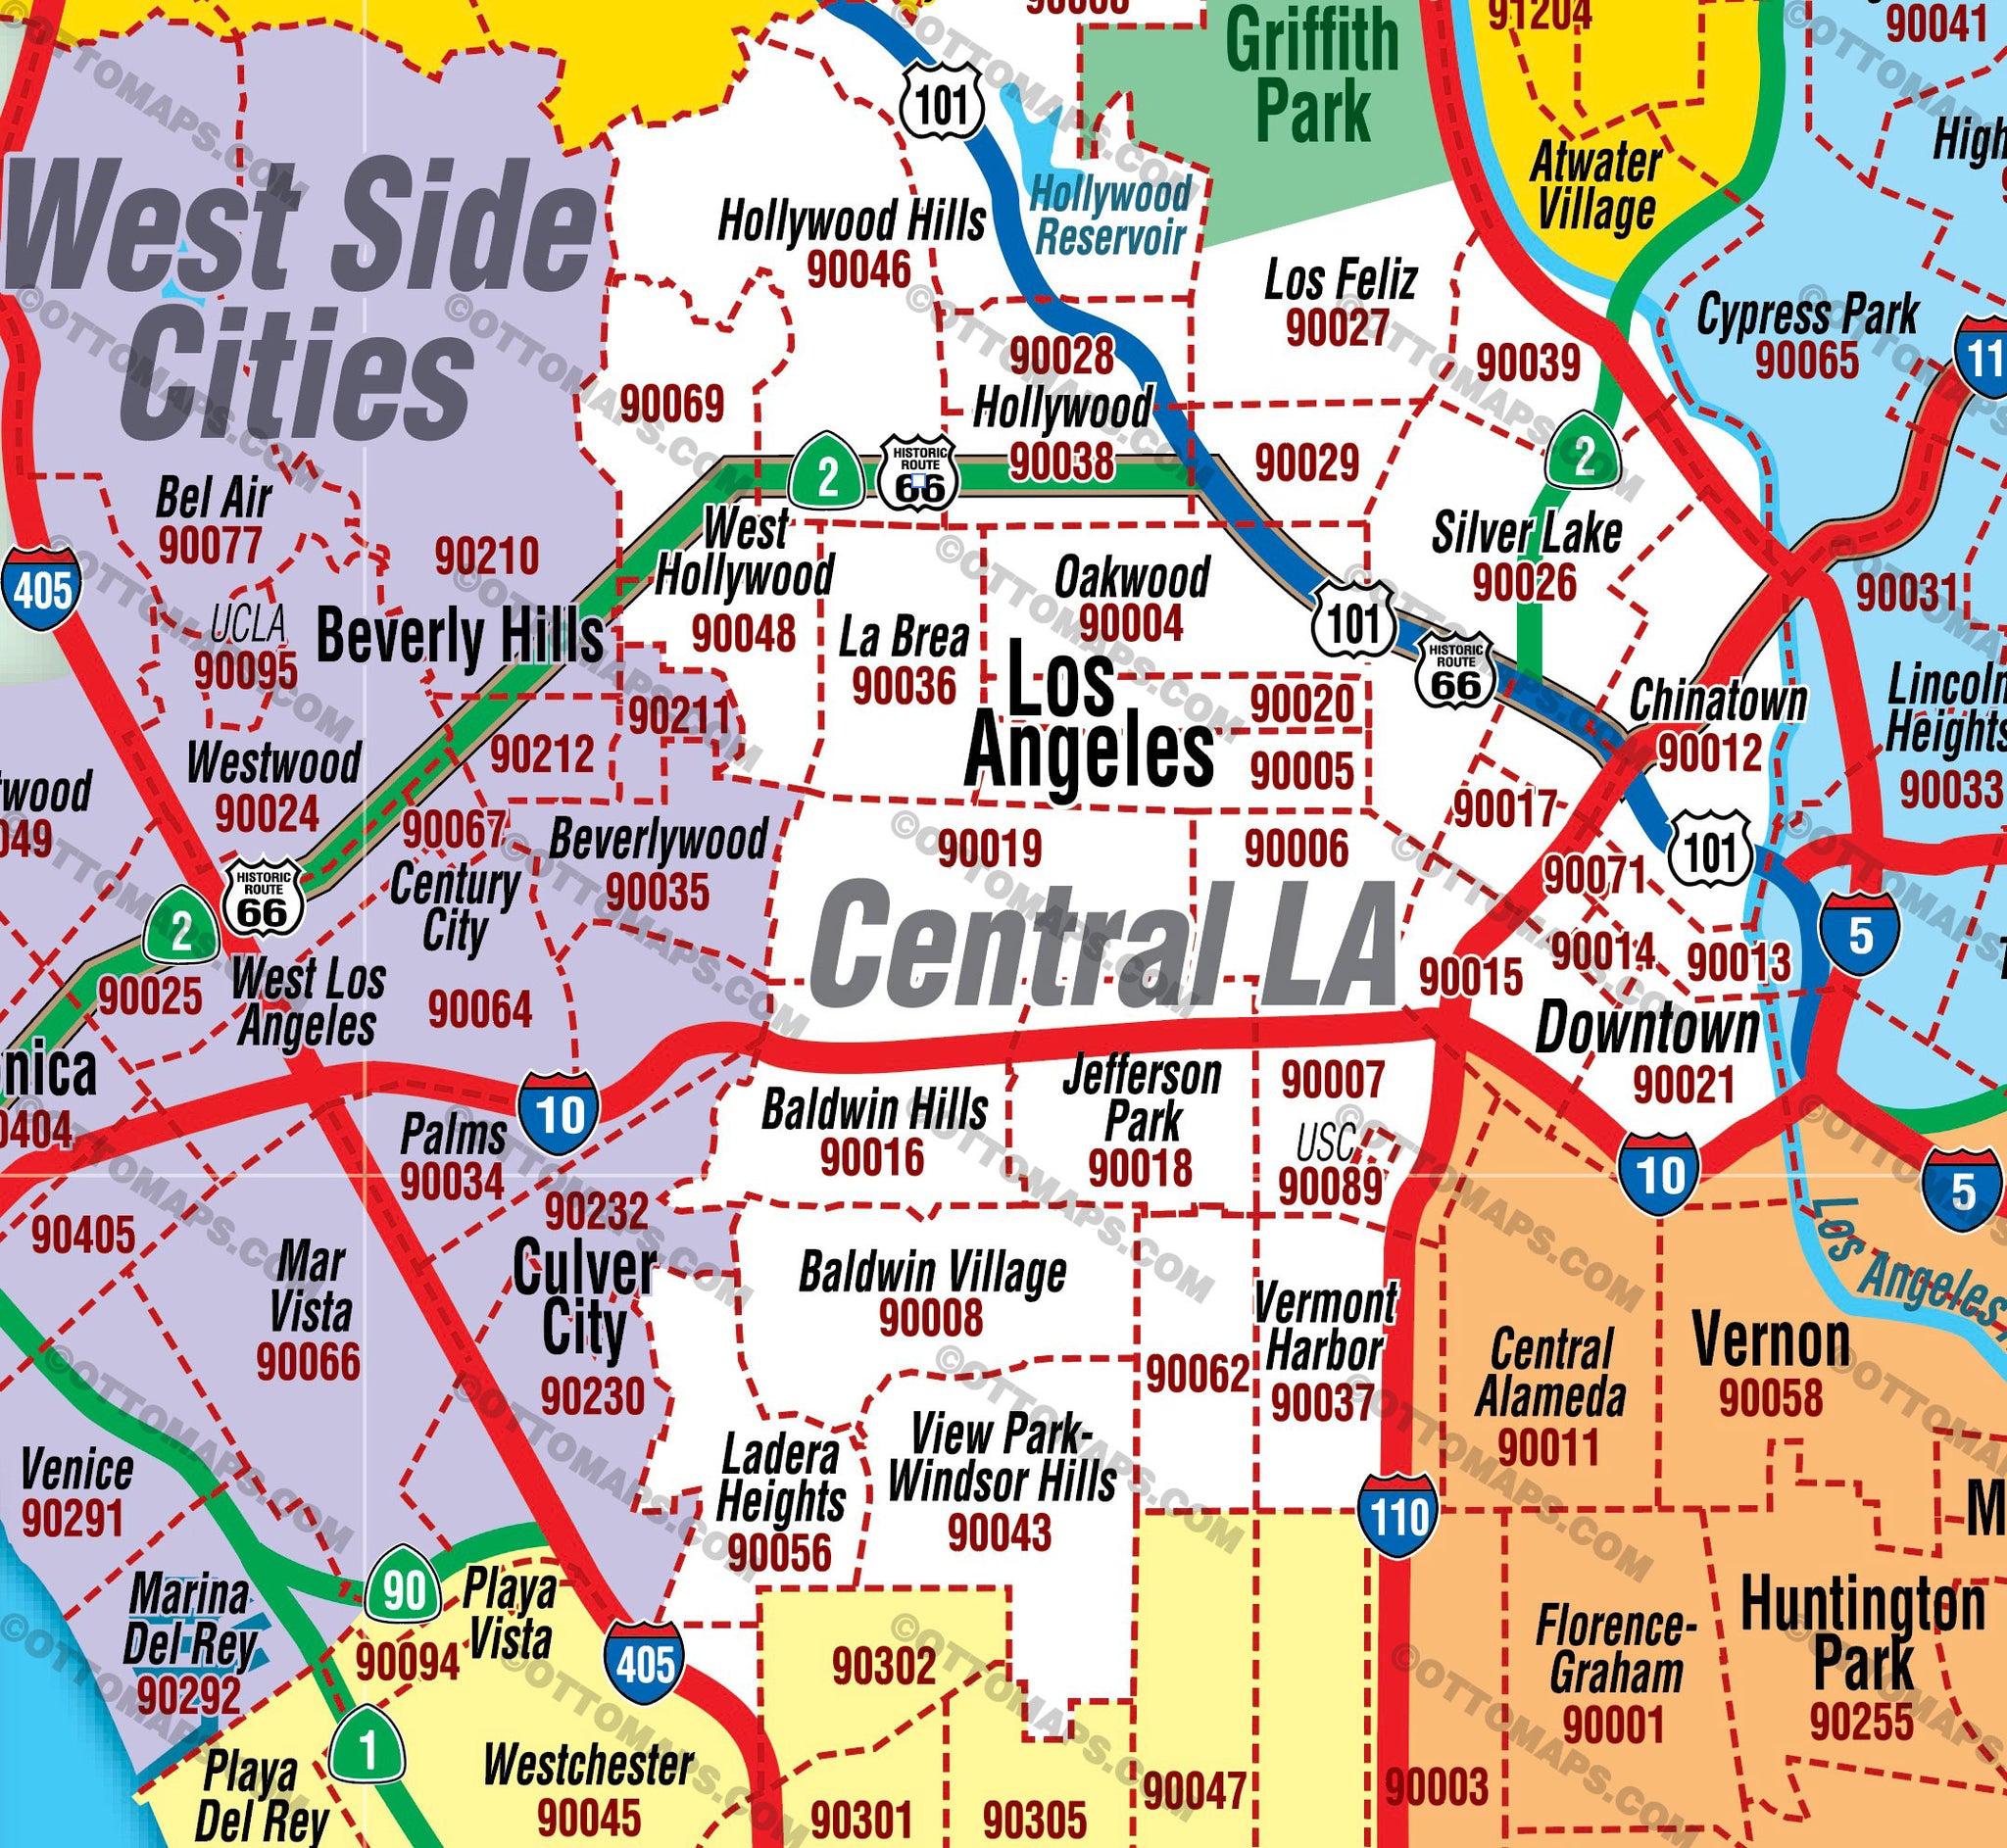 los angeles city zip code map Los Angeles Zip Code Map Full County Areas Colorized Otto Maps los angeles city zip code map